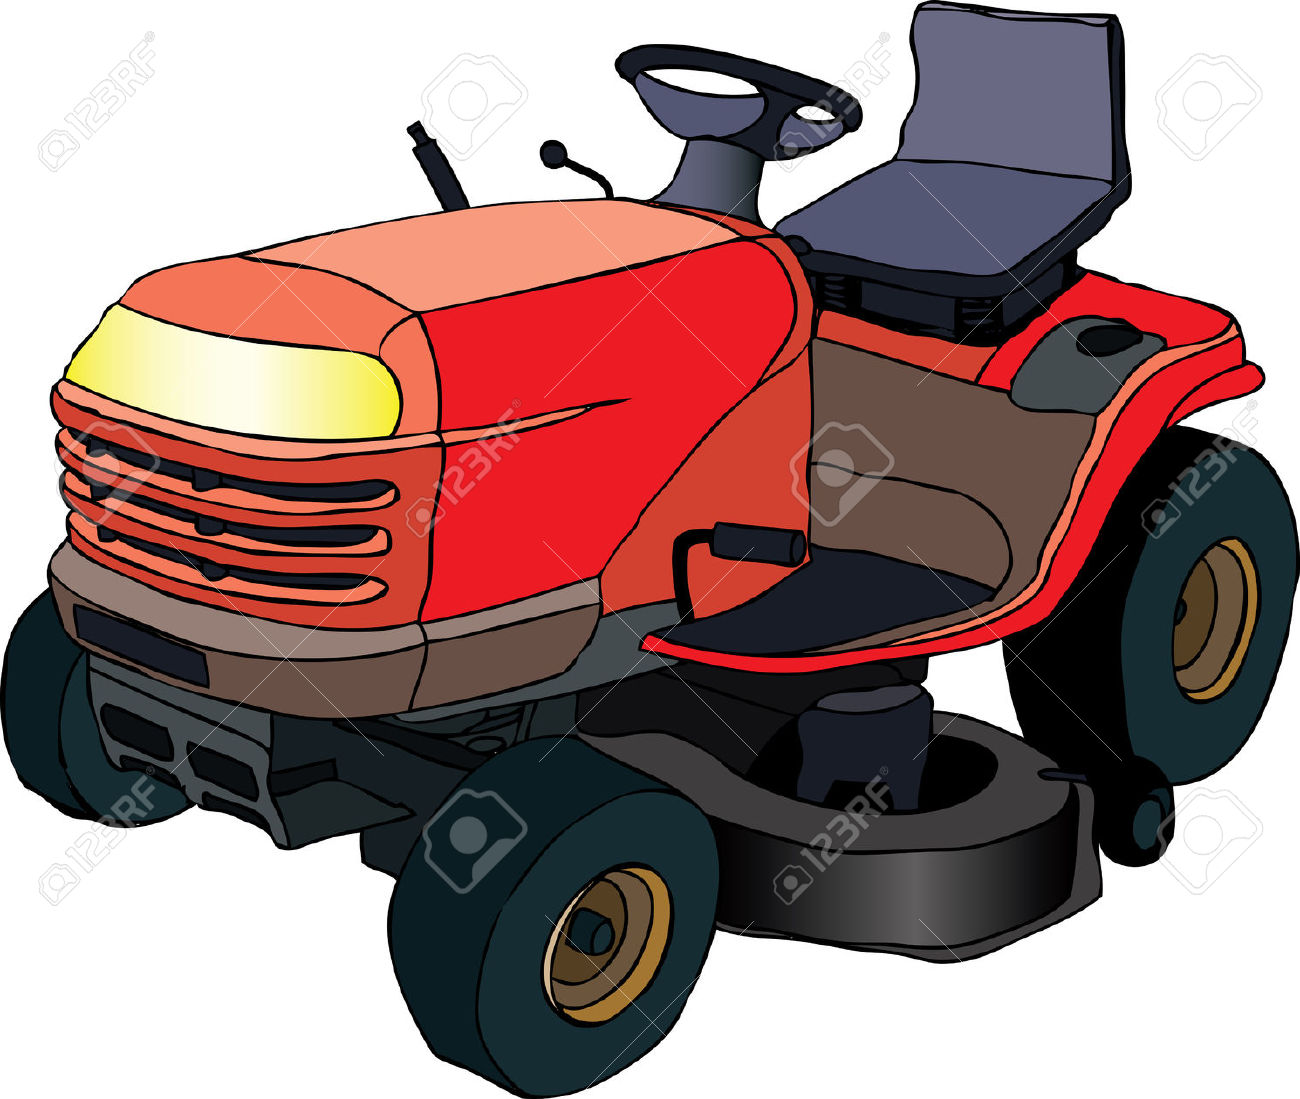 Lawn Mower Clipart at GetDrawings Free download